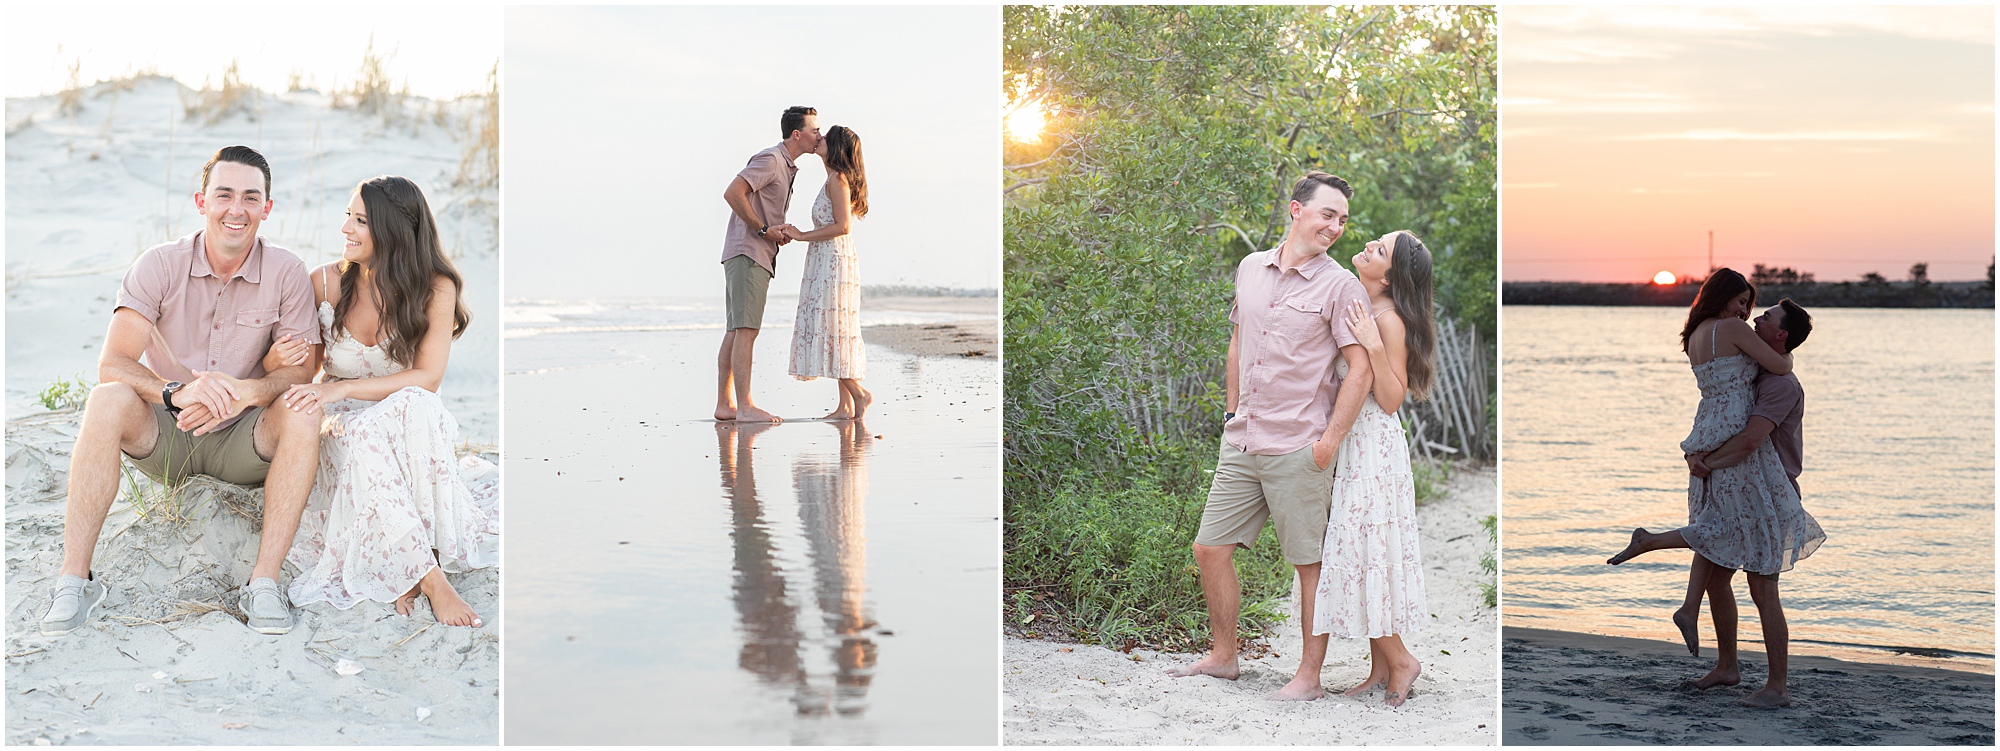 Corson's Inlet in Ocean City is a ebautoful location for a Jersey Shore engagement session. 